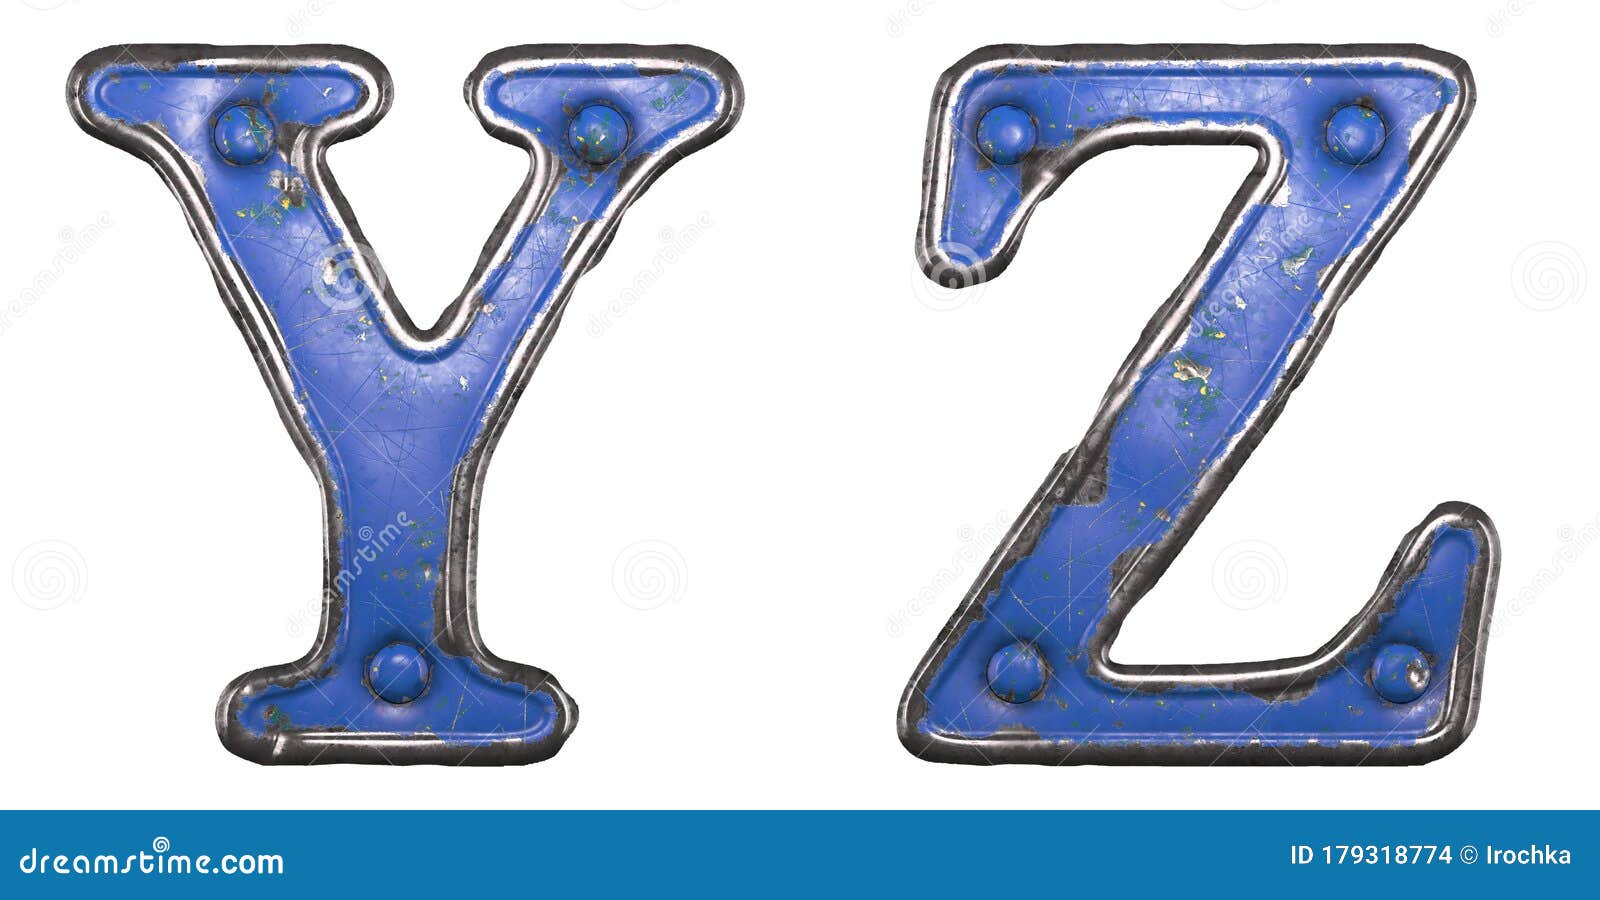 Set of Uppercase Letters Y, Z Made of Painted Metal with Blue Rivets on ...